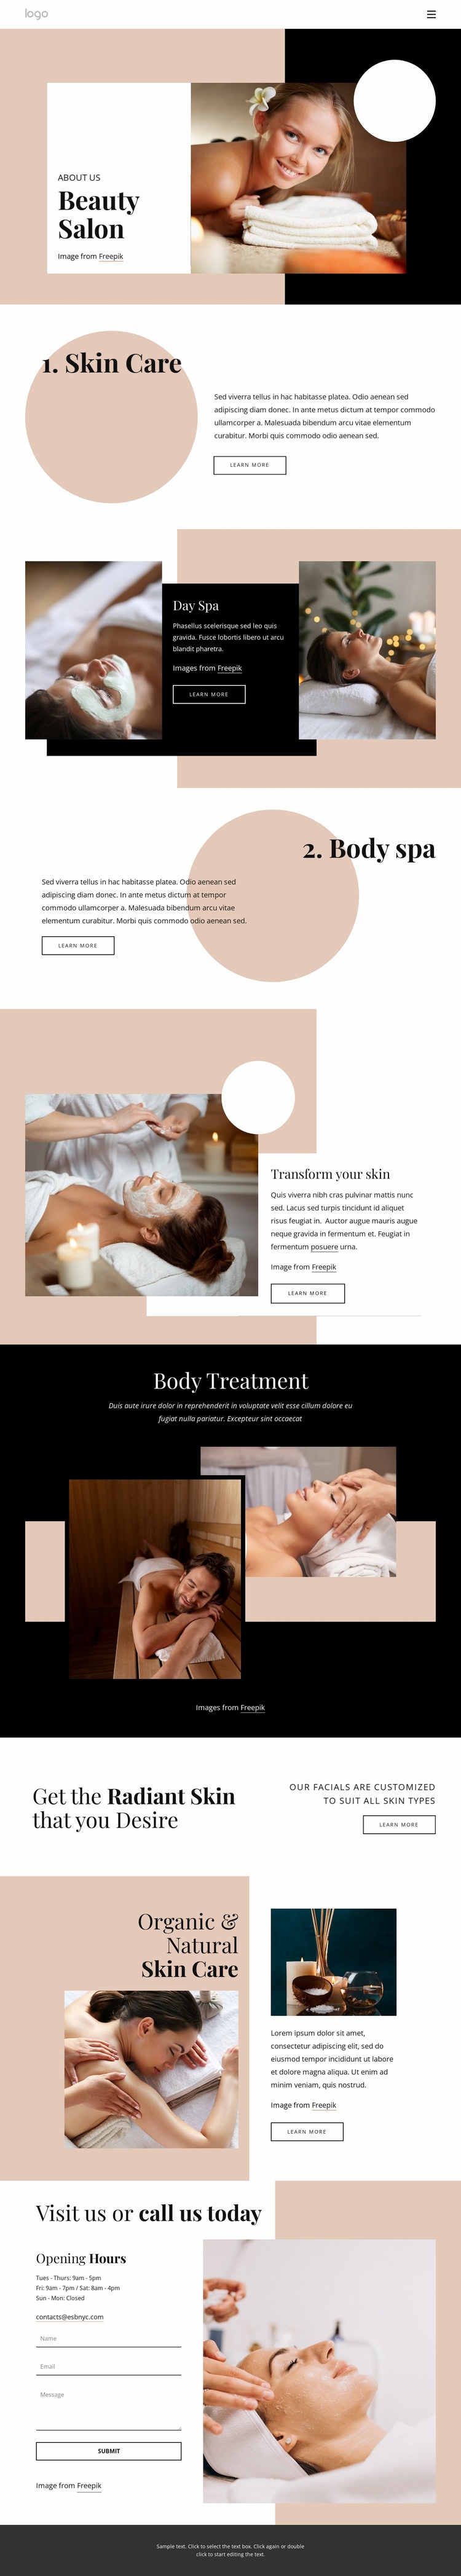 New wellness experiences Landing Page